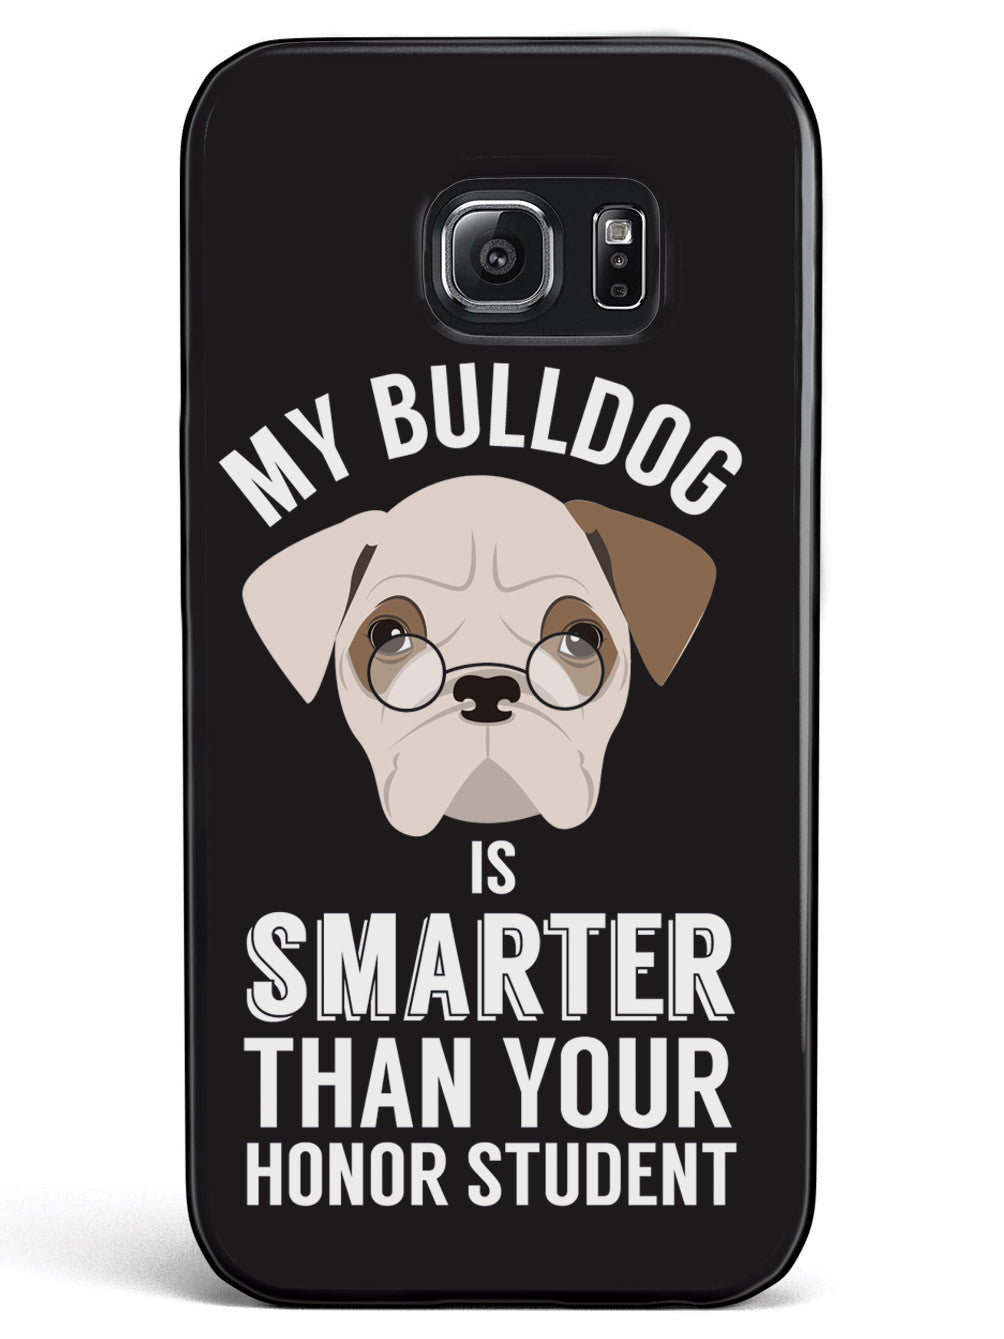 Smarter Than Your Honor Student - Bulldog Case